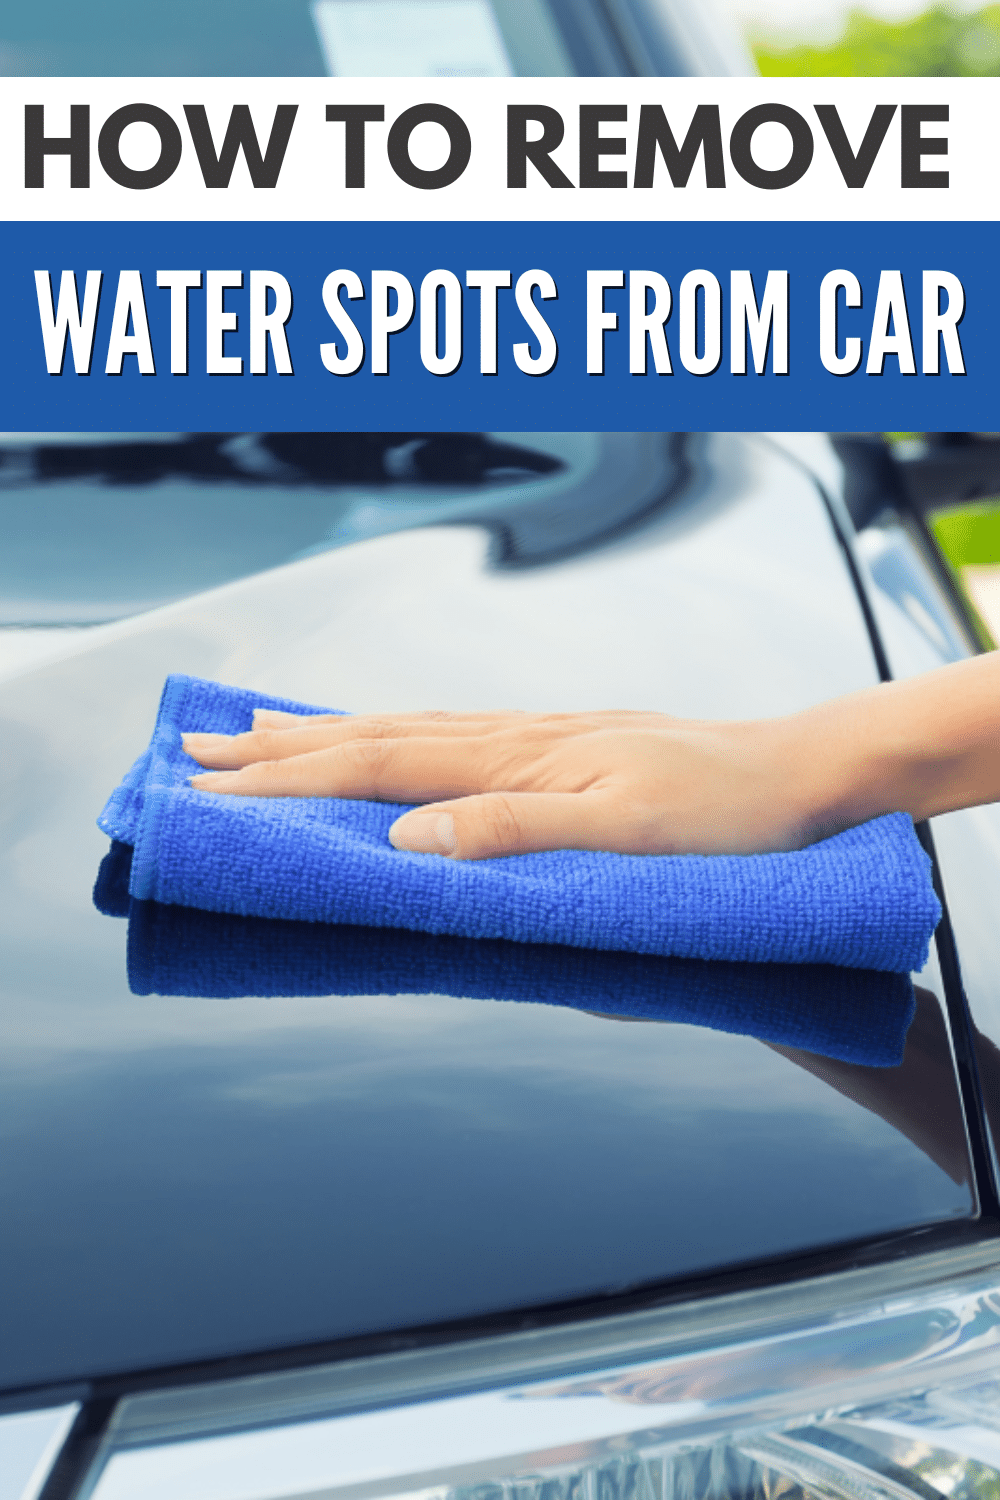 Learn effective techniques to remove water spots from your car.